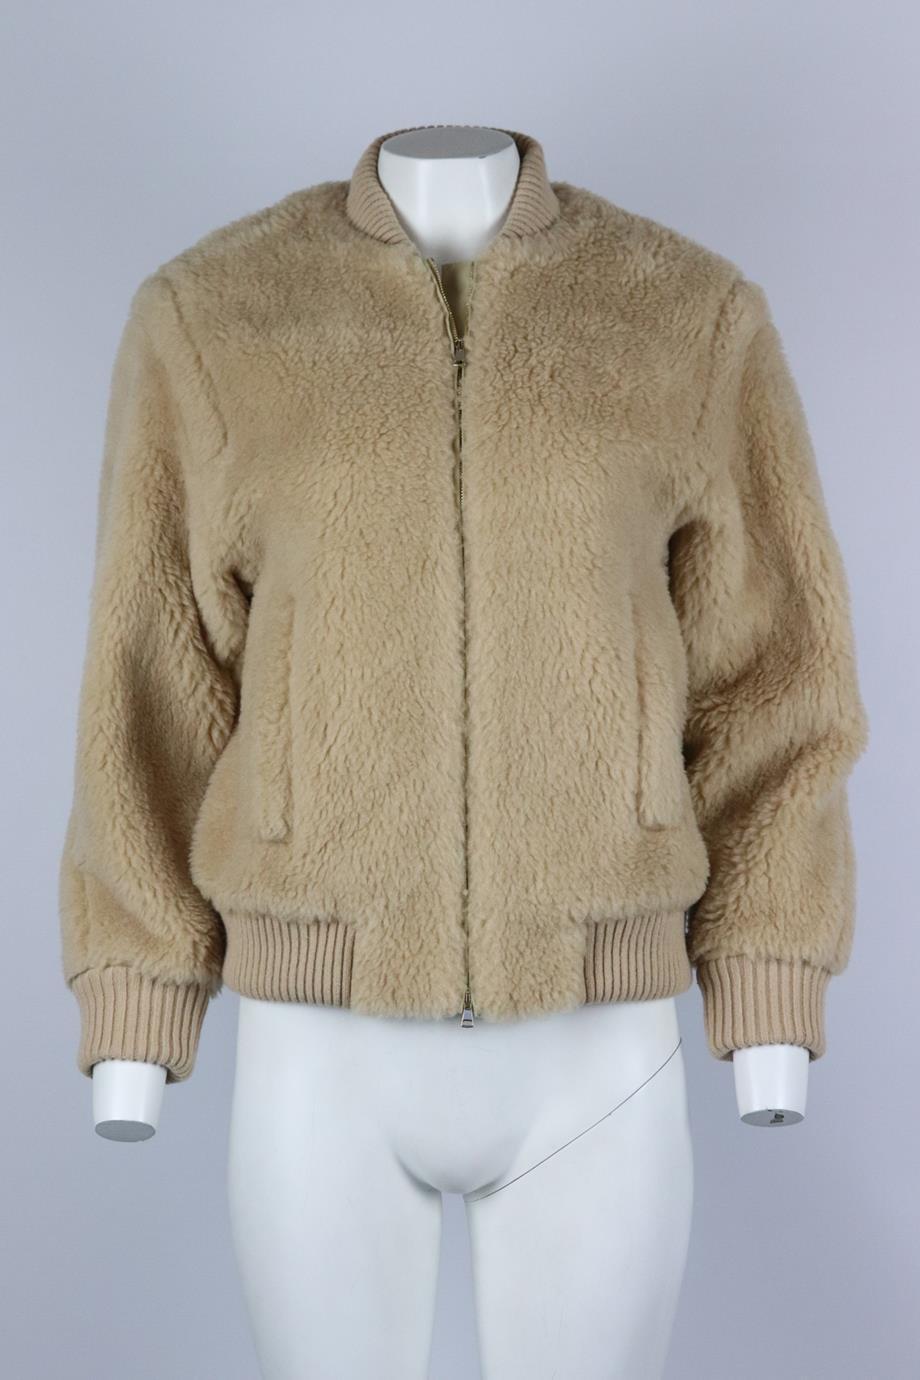 Max Mara camel hair and silk blend bomber jacket. Beige. Long sleeve, crewneck. Zip fastening at front. 88% Camelwool, 12% silk; fabric2: 100% polyester; lining: 68% acetate, 32% polyester; detail: 66% wool, 28% cashmere, 5% polyamide, 1% elastane.